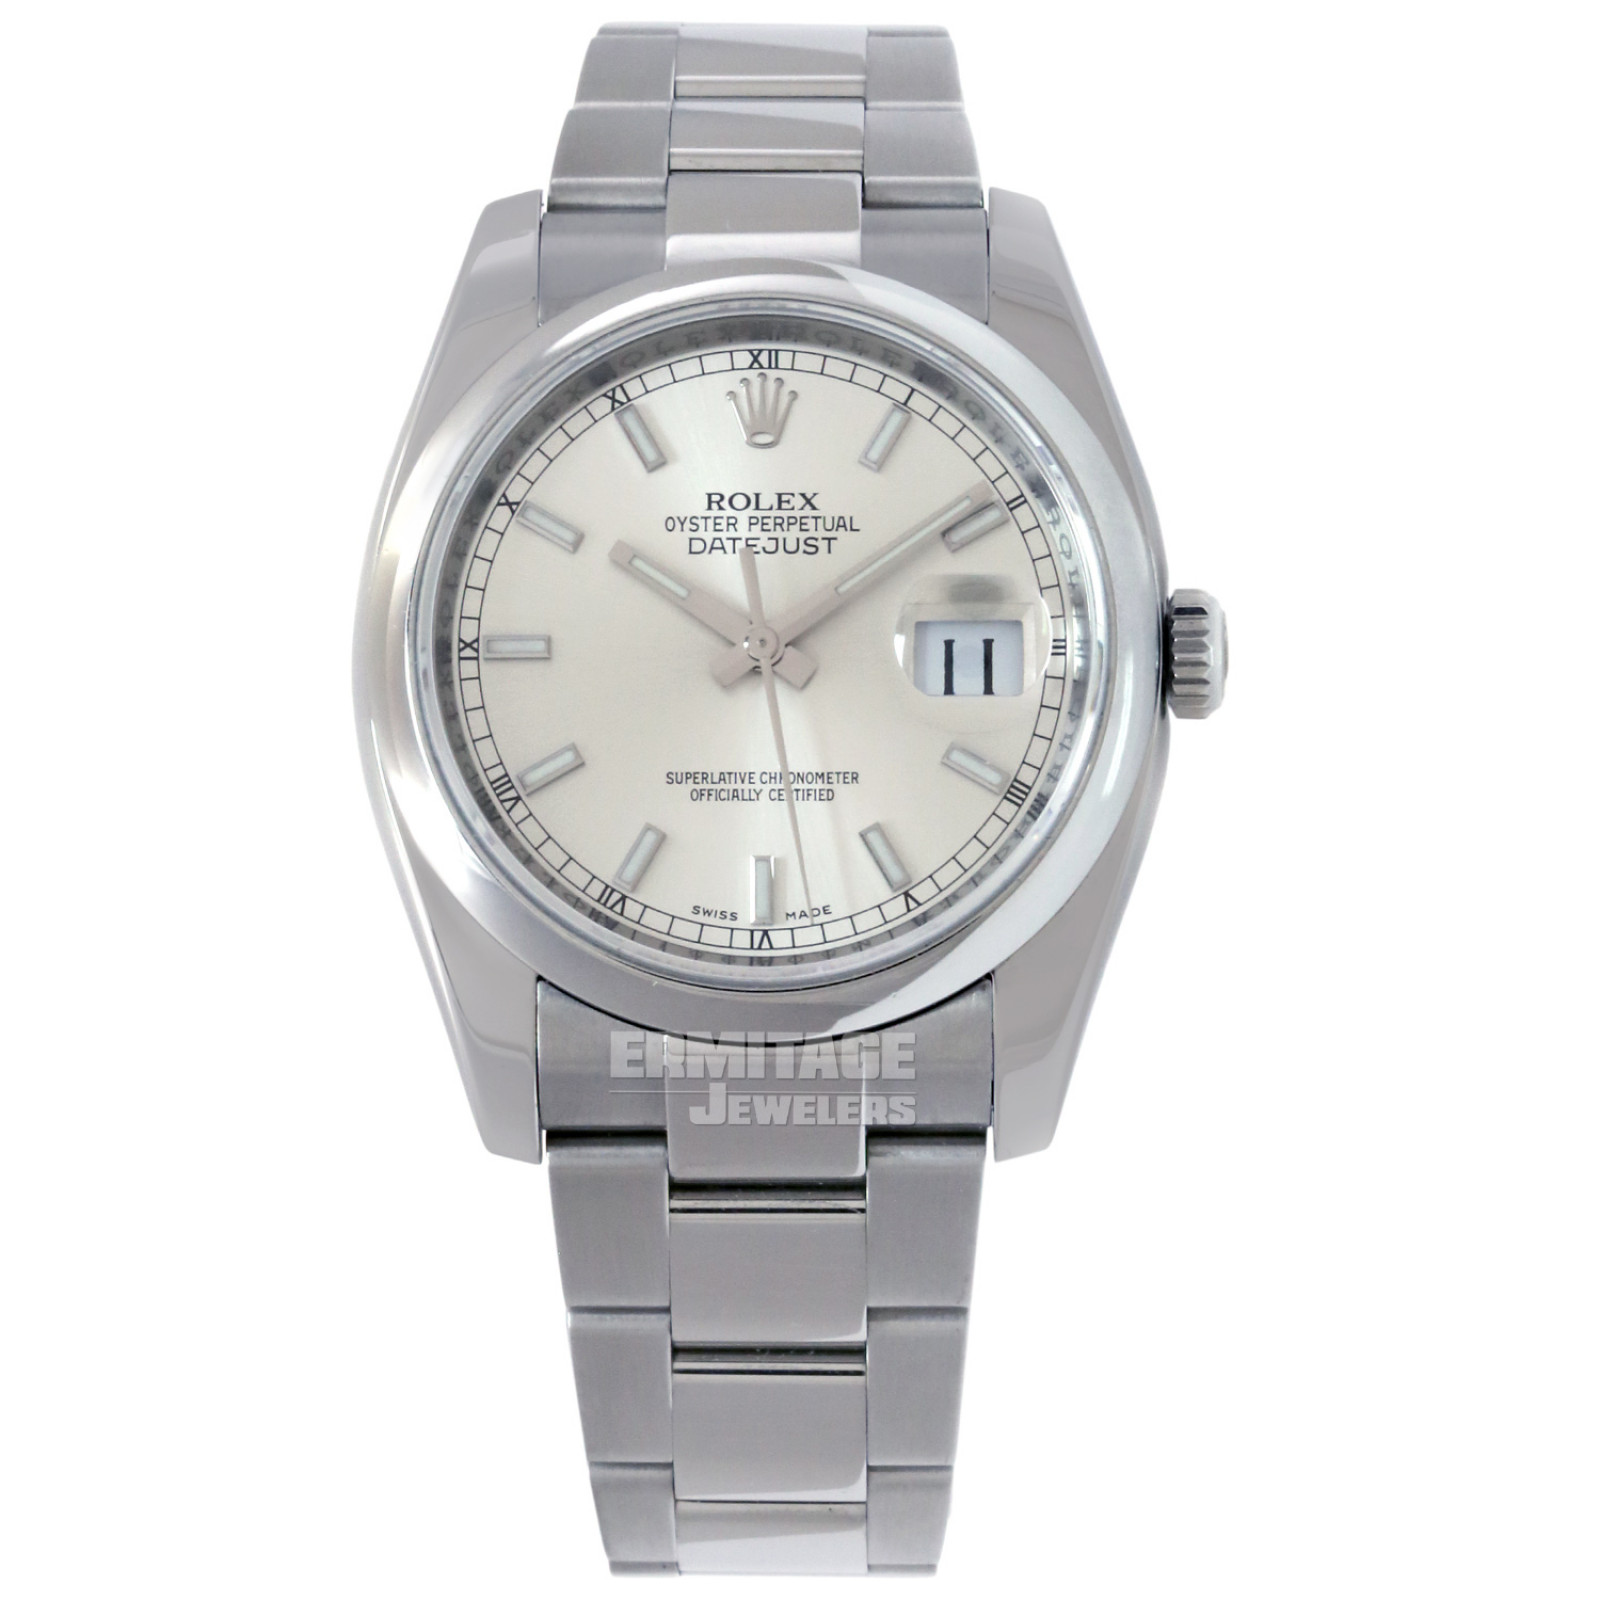 Rolex Datejust 116200 with Steel Dial